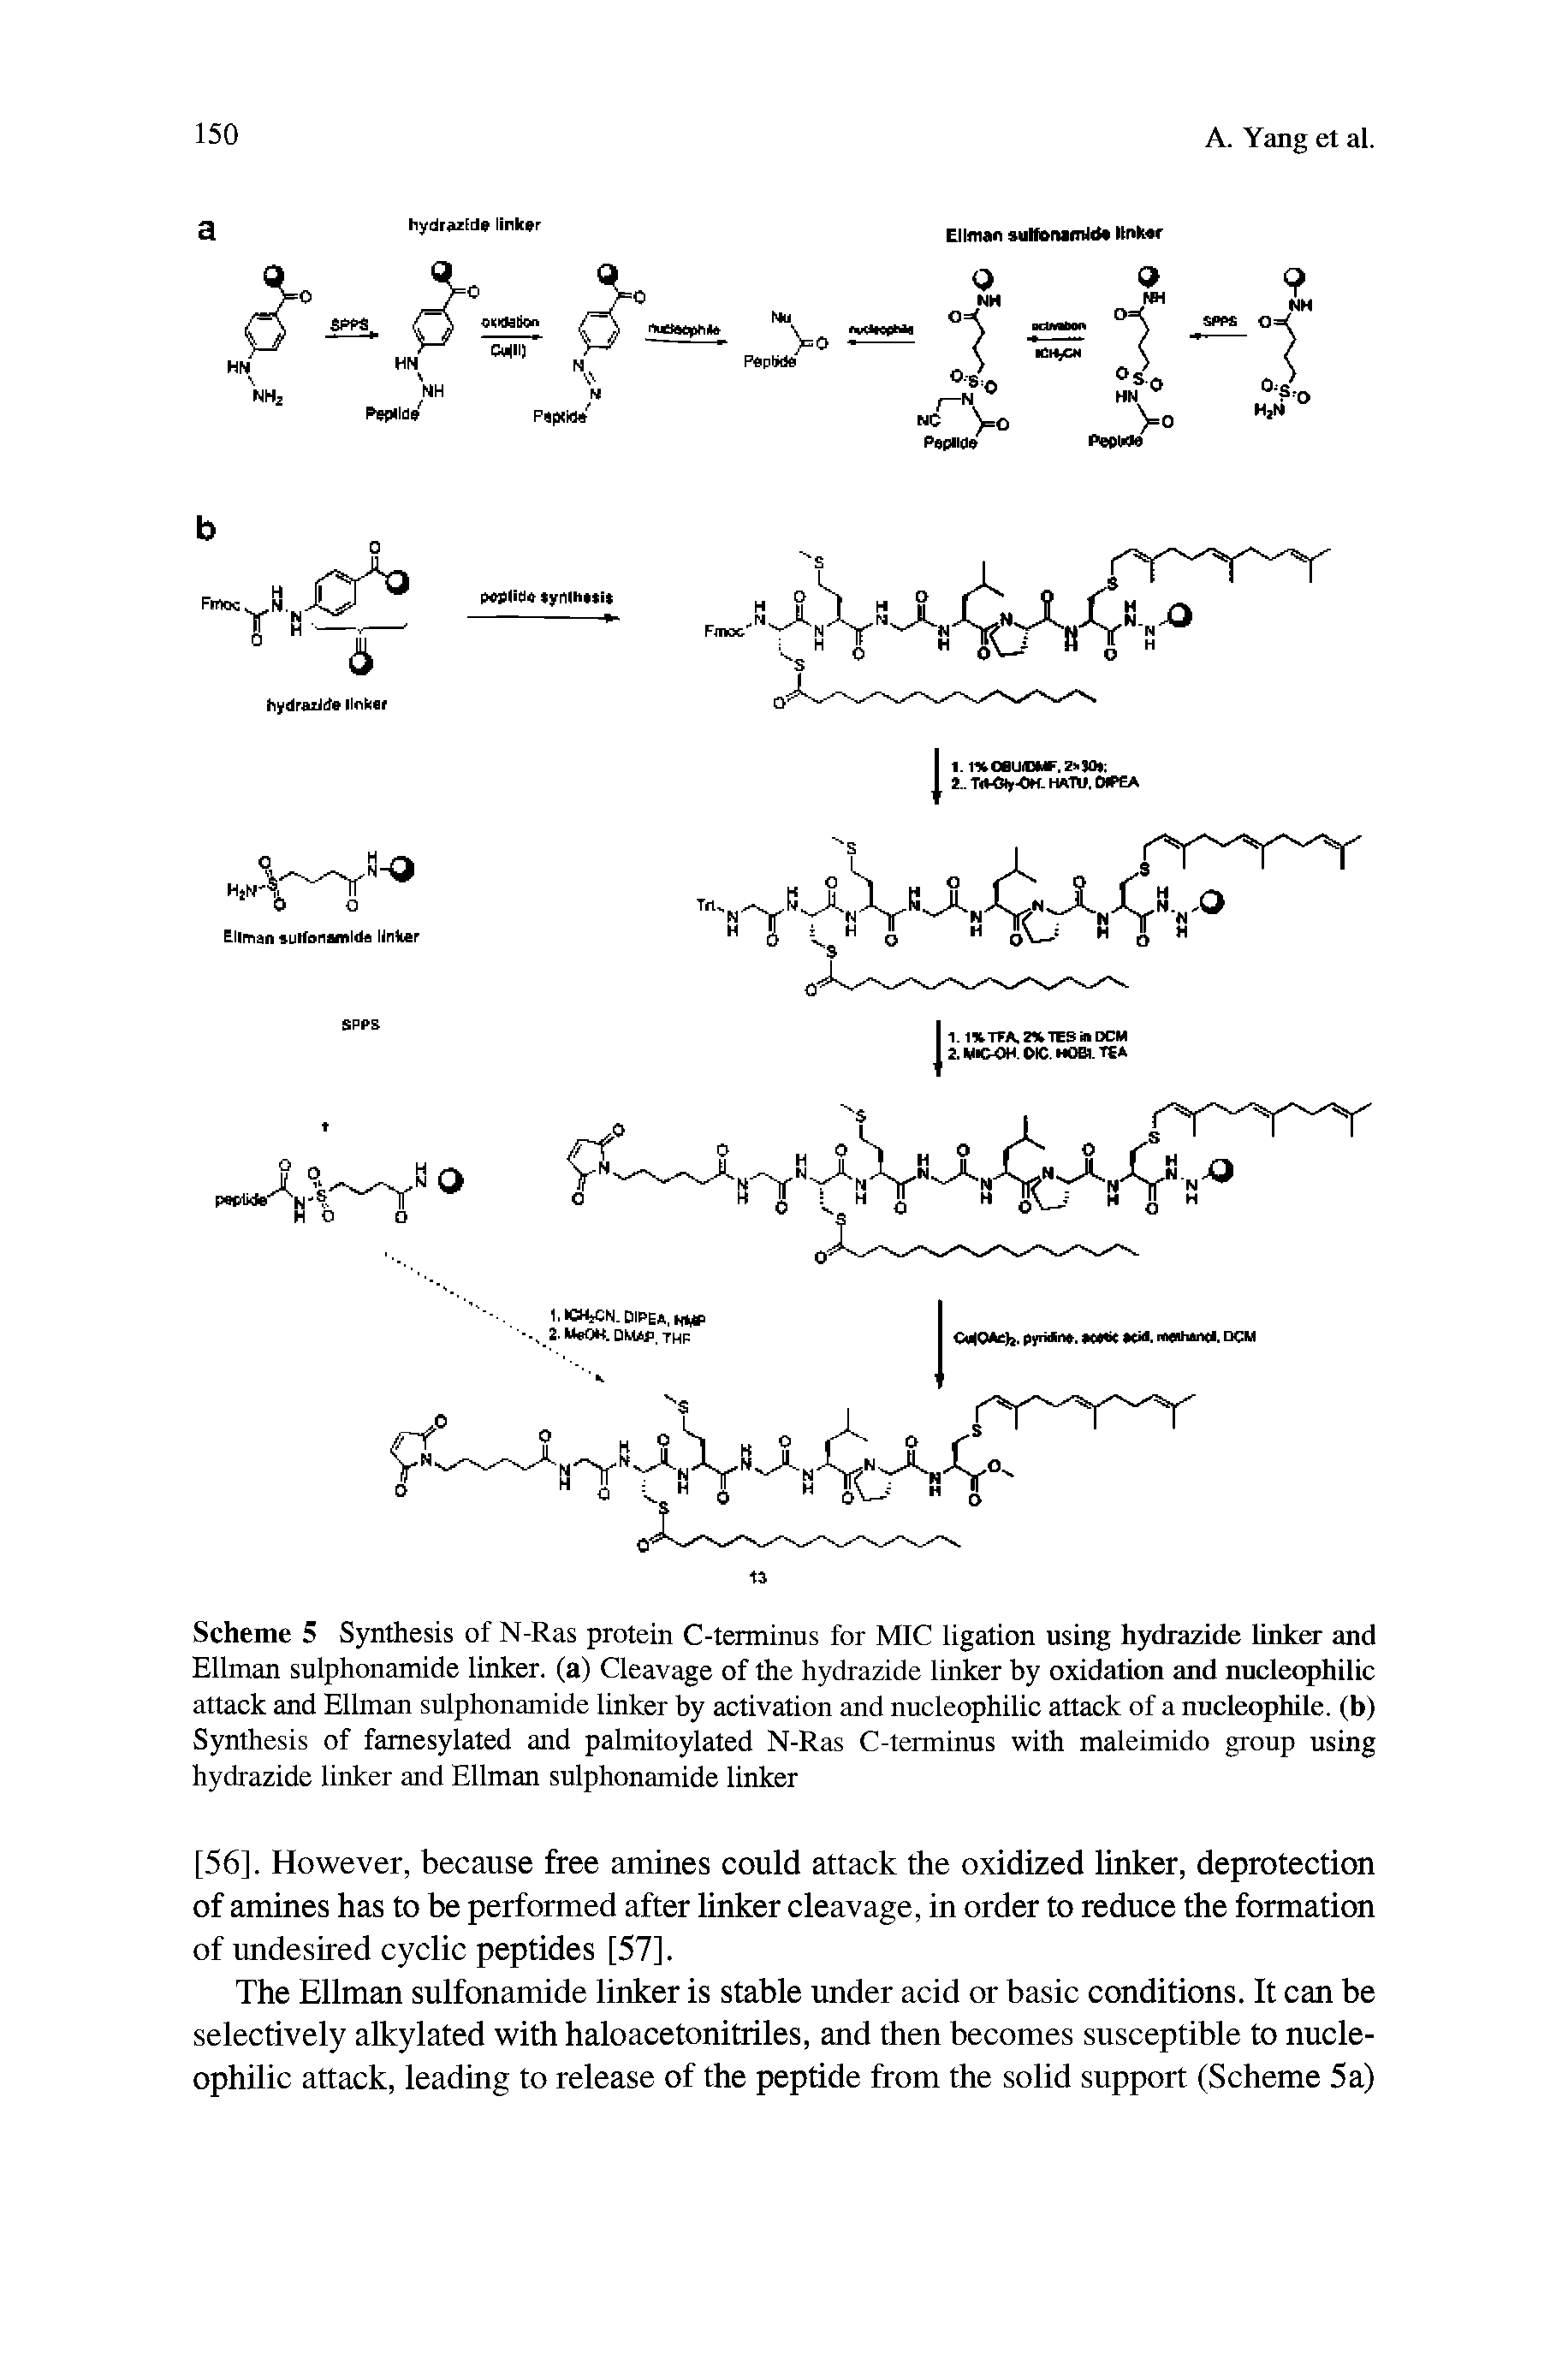 Scheme 5 Synthesis of N-Ras protein C-terminus for MIC ligation using hydiazide linker and Elhnan sulphonamide linker, (a) Cleavage of the hydrazide linker by oxidation and nucleophilic attack and Elhnan sulphonamide linker by activation and nucleophilic attack of a nucleophile, (b) Synthesis of famesylated and pahnitoylated N-Ras C-terminus with maleimido group using hydrazide linker and Ellman sulphonamide linker...